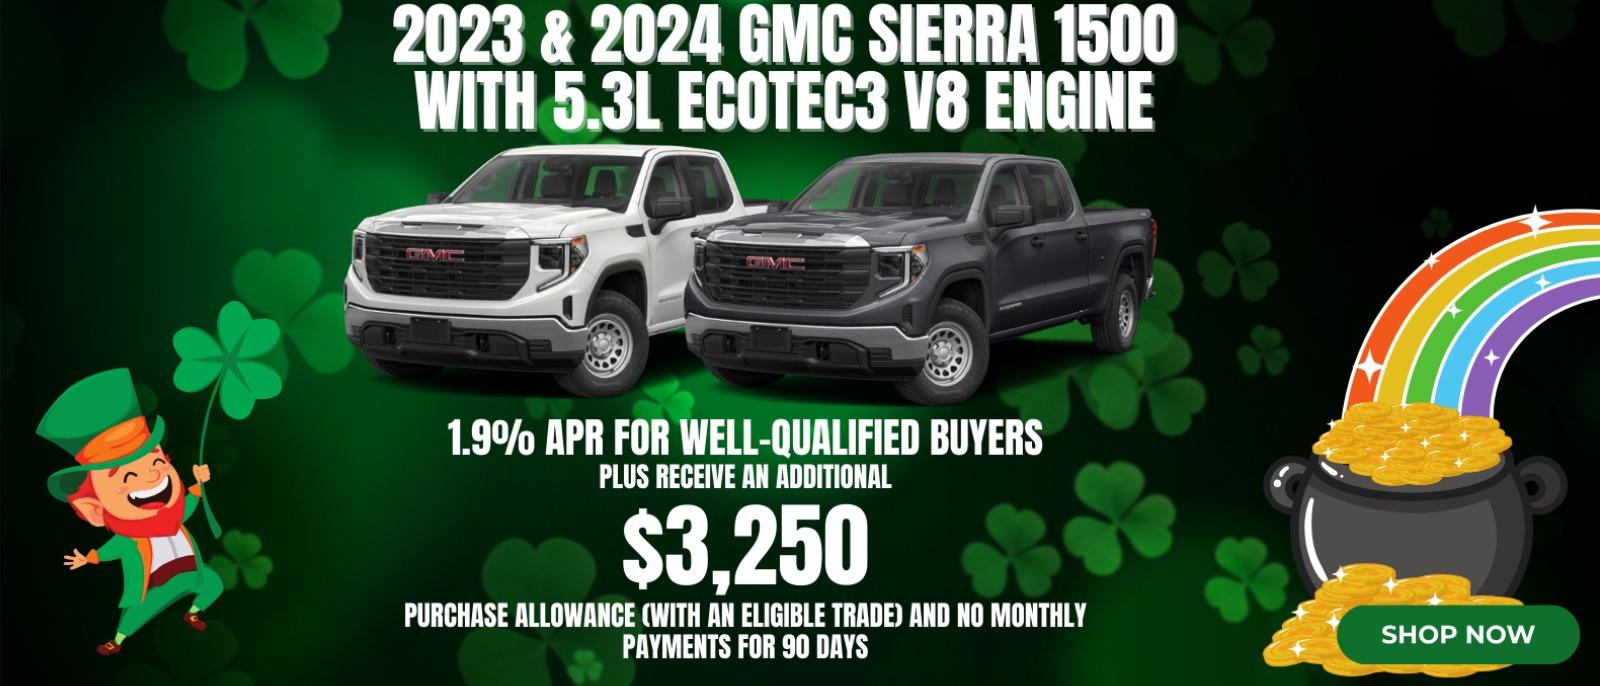 2023 & 2024 GMC Sierra 1500 w/5.3L Ecotec3 V8 Engine $6,000 purchase allowance when you trade eligible vehicle